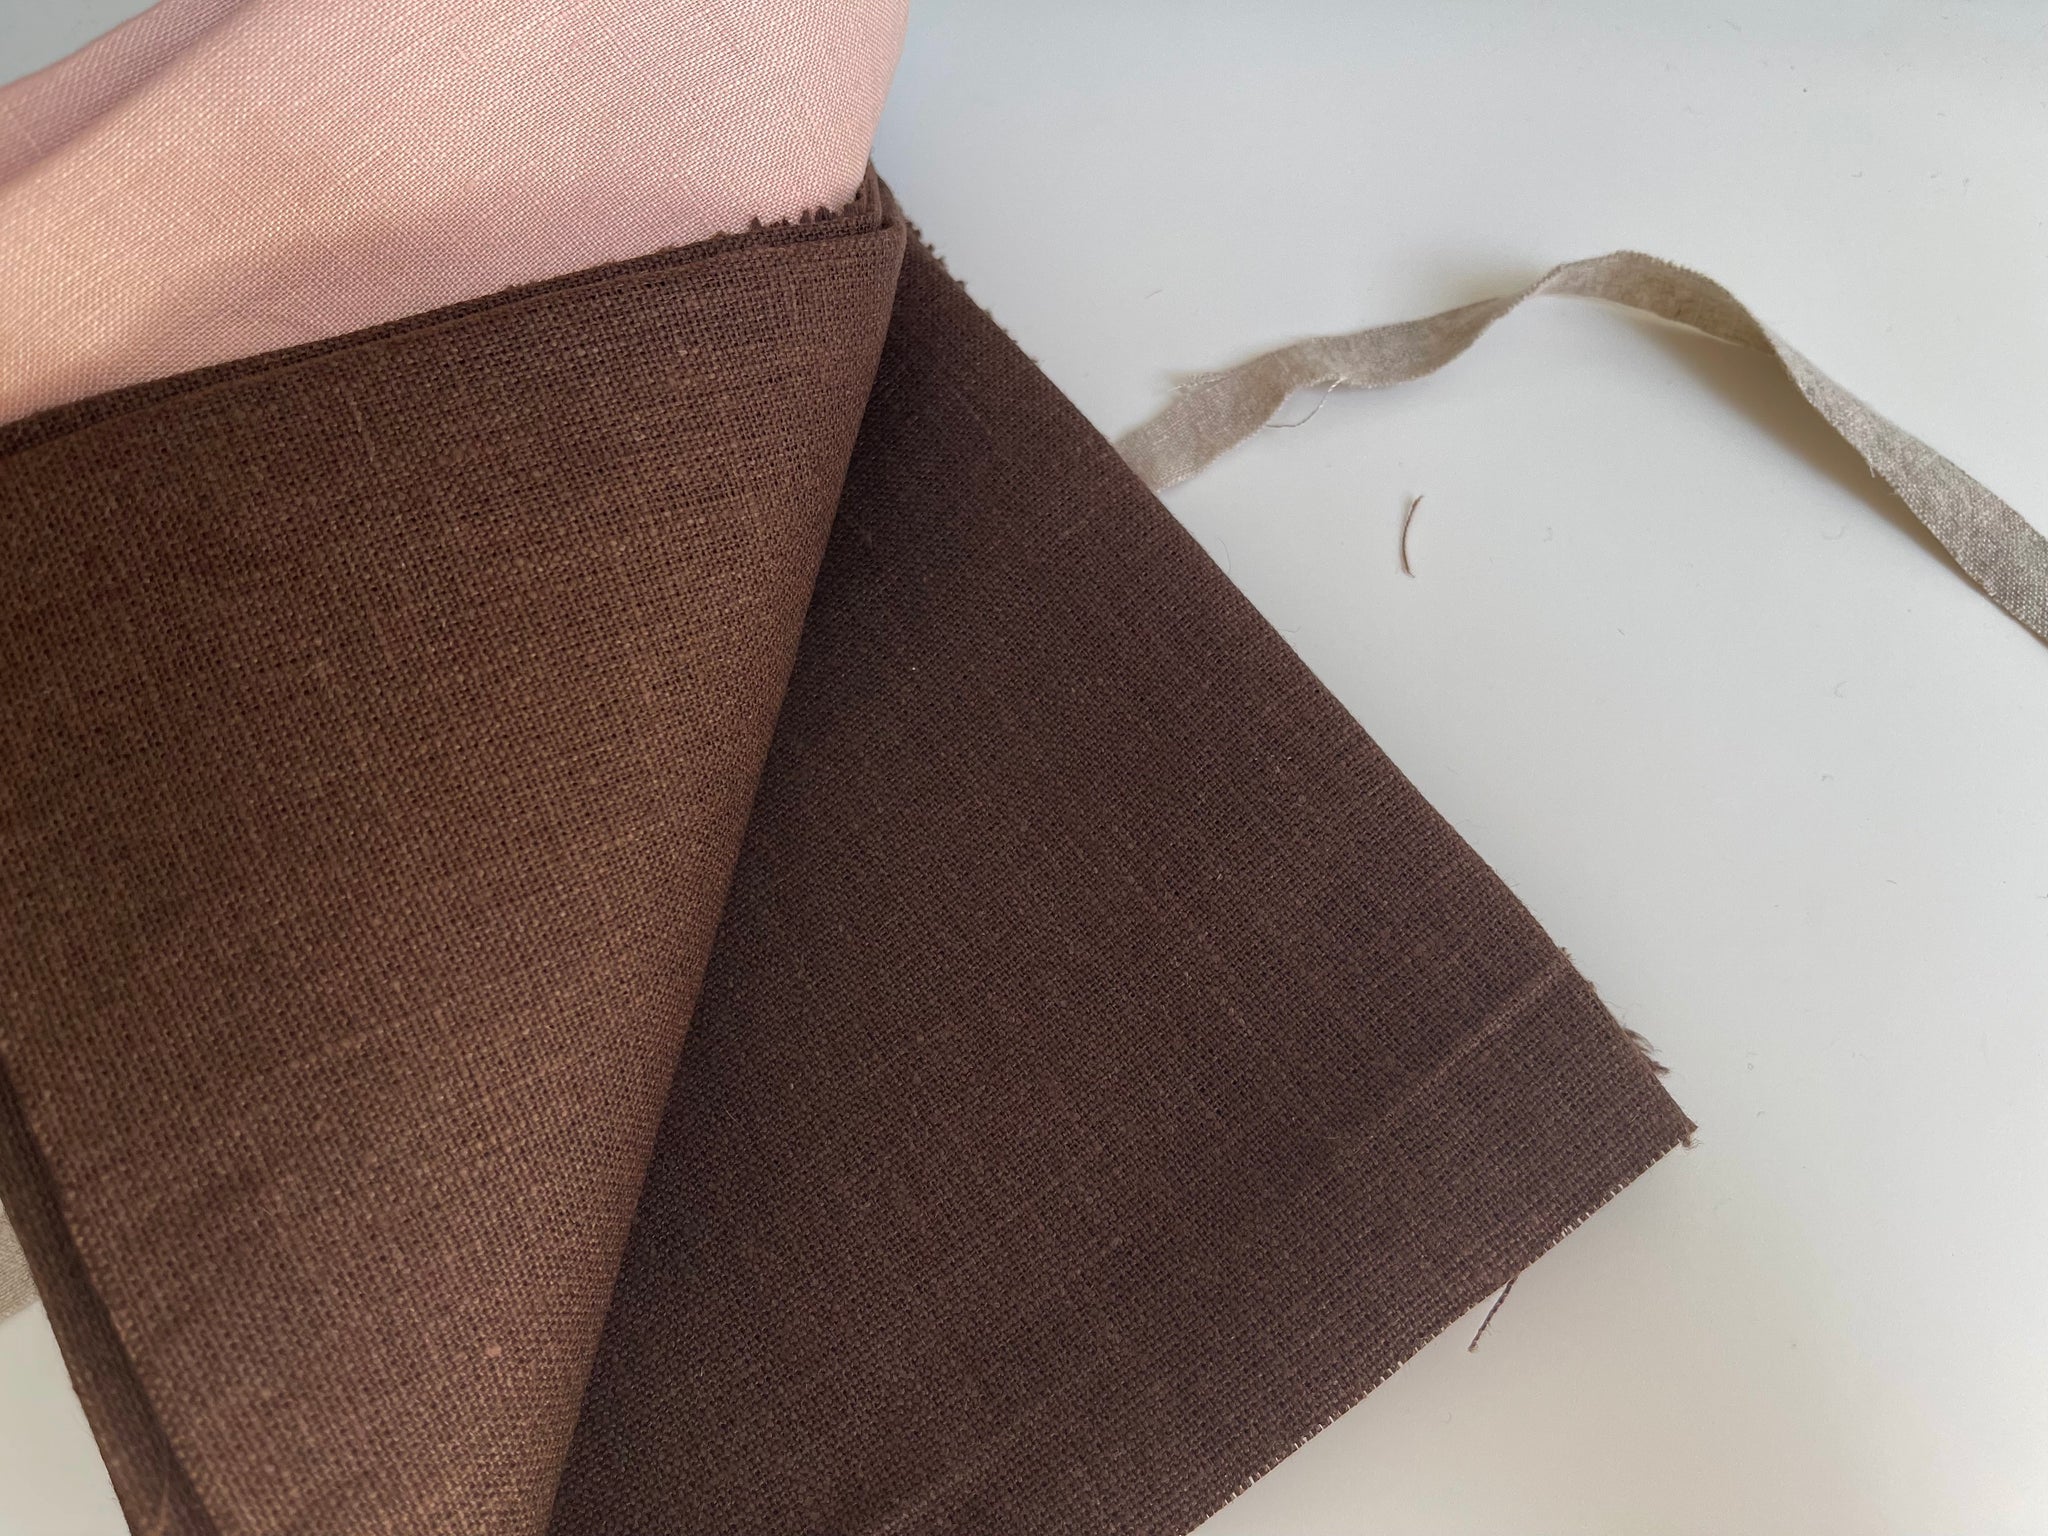 Linen Fabric Remnants - Dusty Rose and Espresso